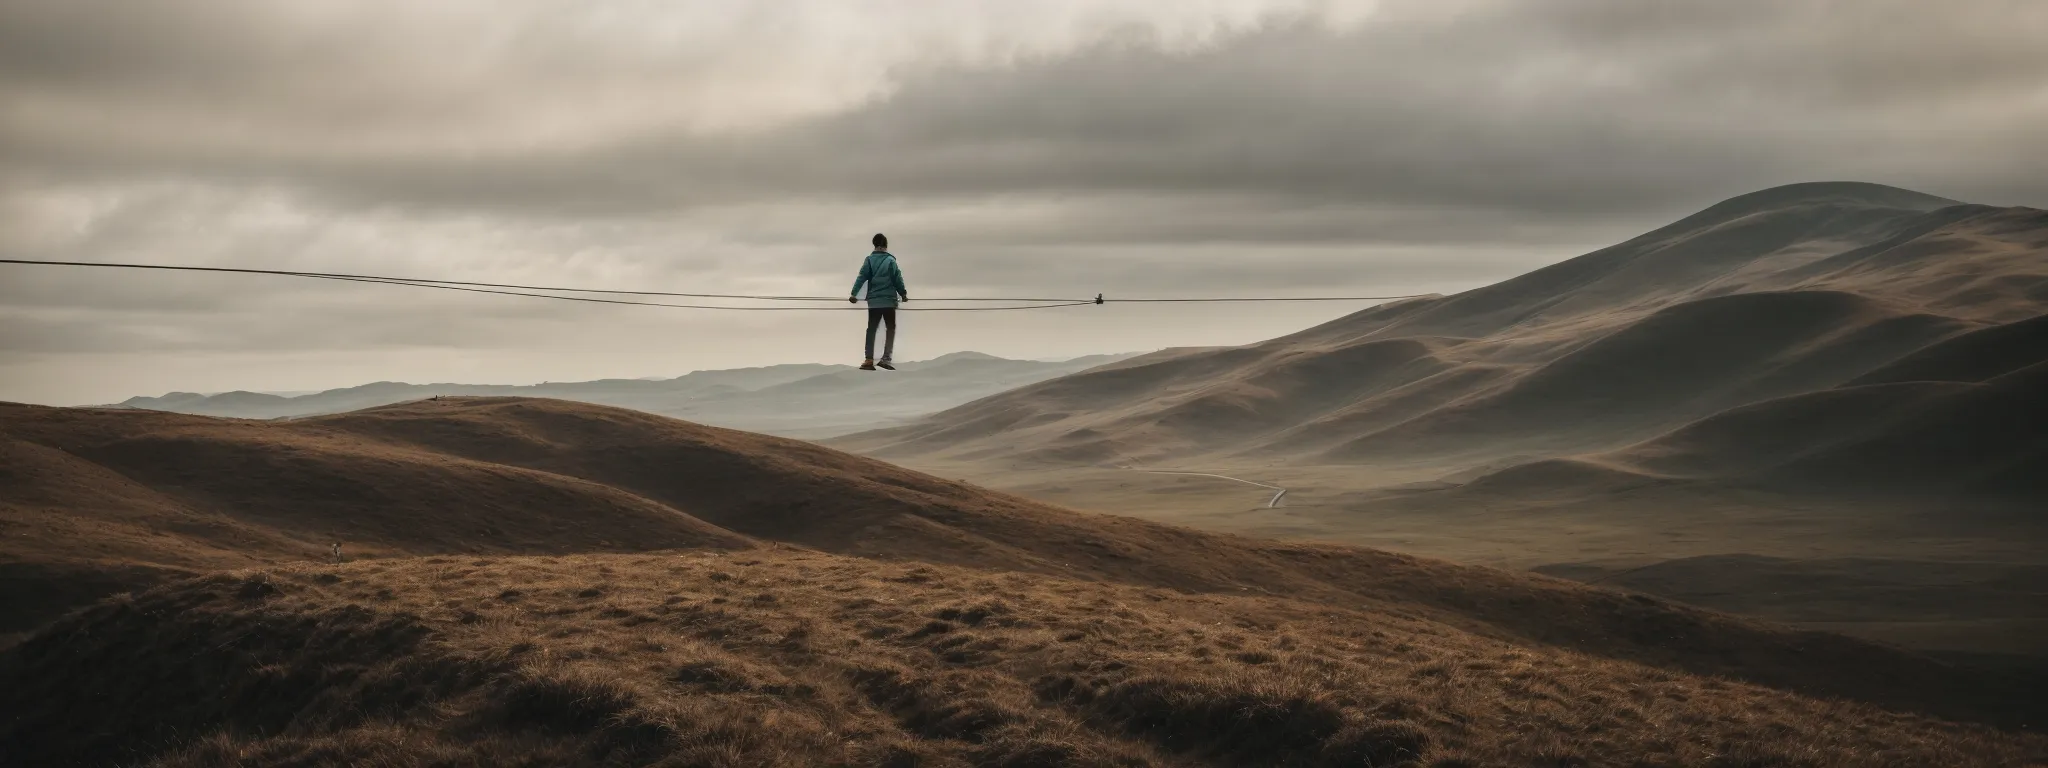 a person confidently walking a tightrope above a digital landscape symbolizing the balance between seo challenges and user engagement.